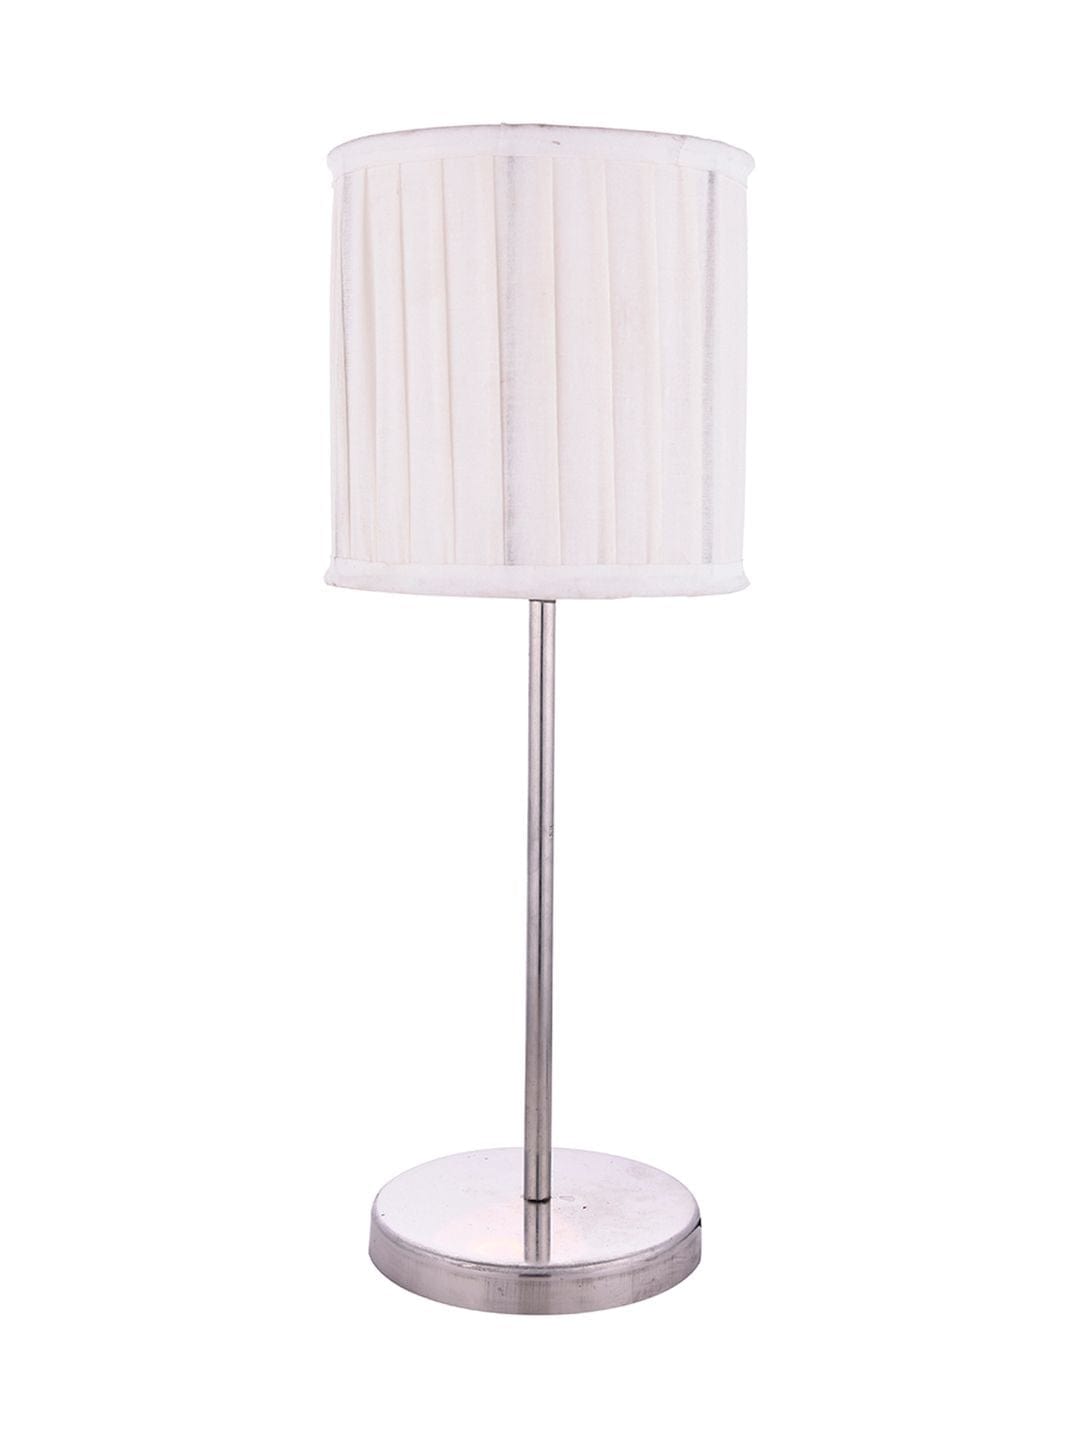 Metal Chrome Finish Lamp with Pleeted Cotton White Shade